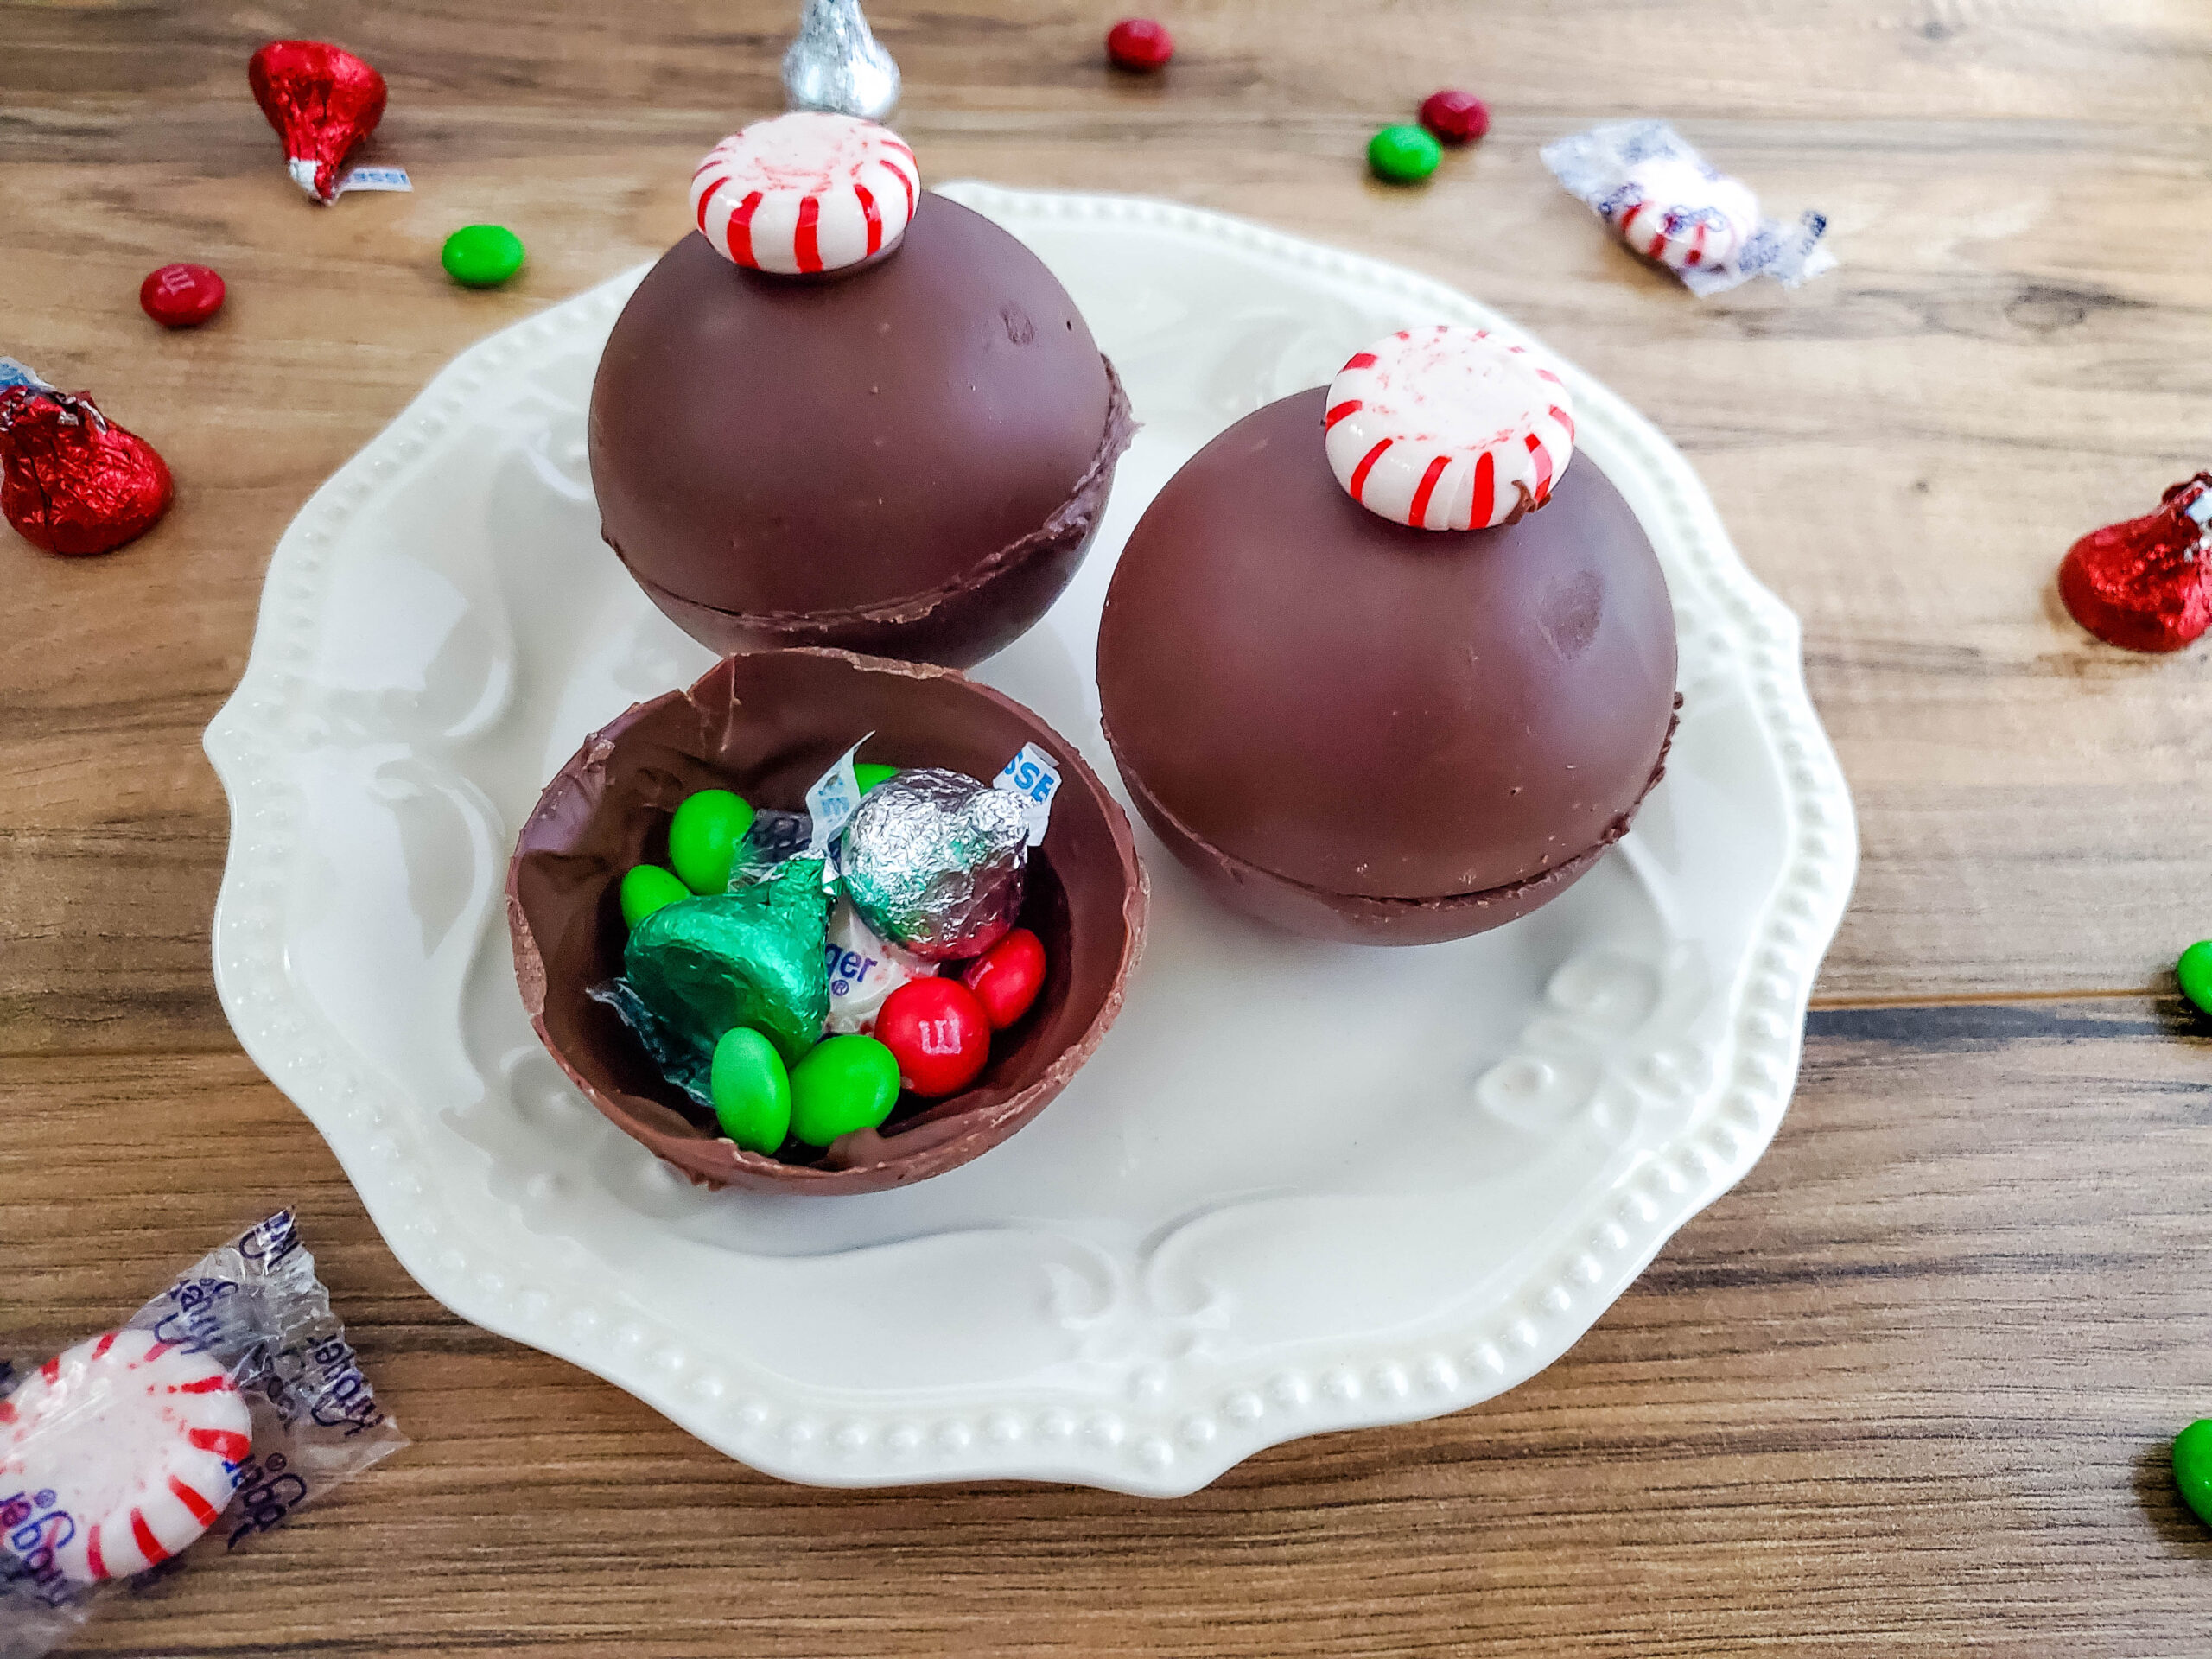 hollow chocolate ball with candy inside